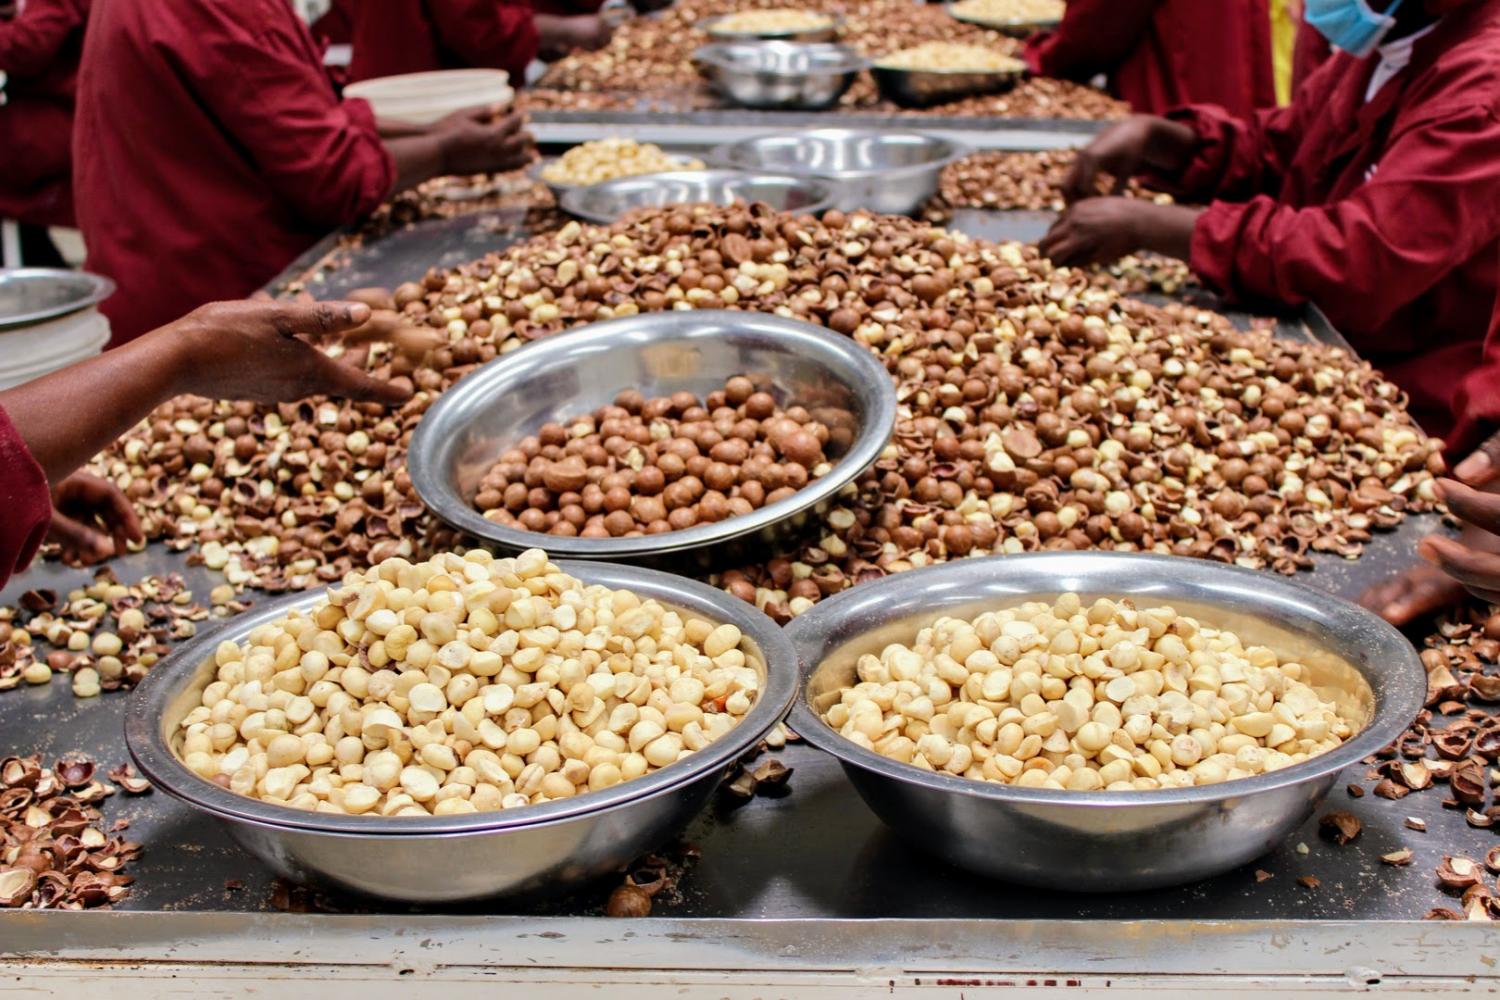 Let's visit Kenya, where macadamia nuts are grown for you with care and in harmony with nature and its inhabitants.